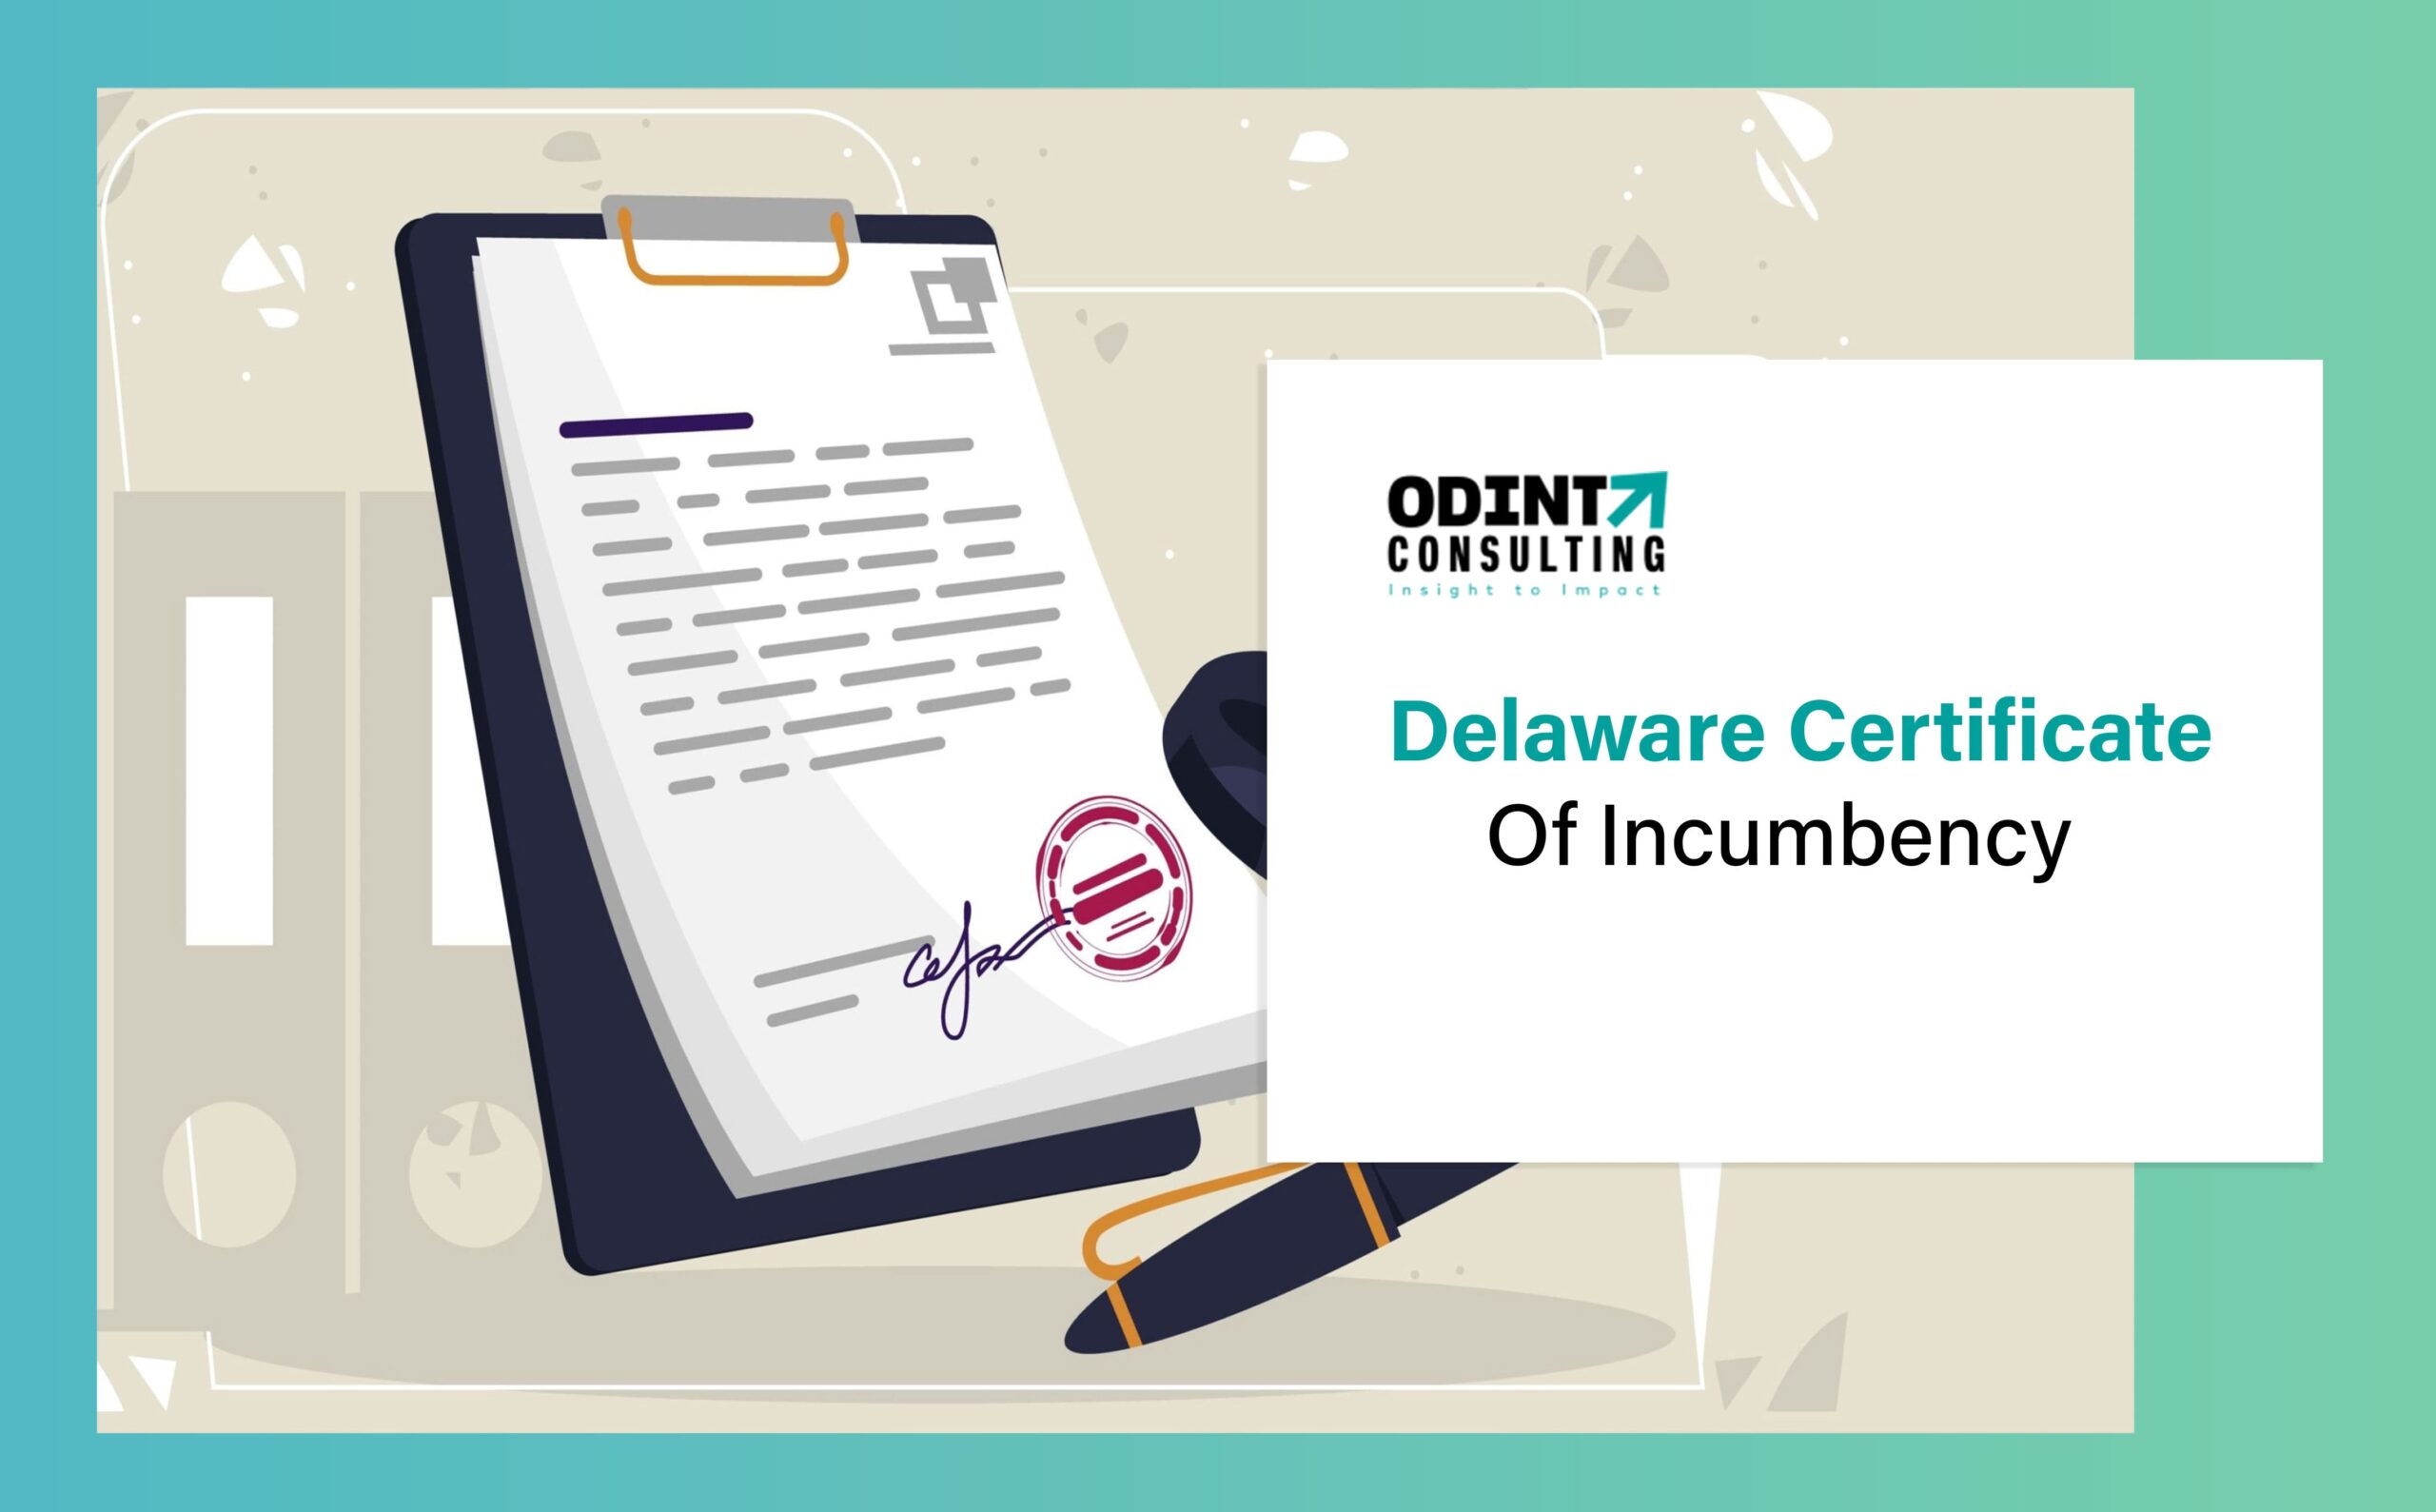 Delaware Certificate Of Incumbency: Procedure To Obtain & Details Included